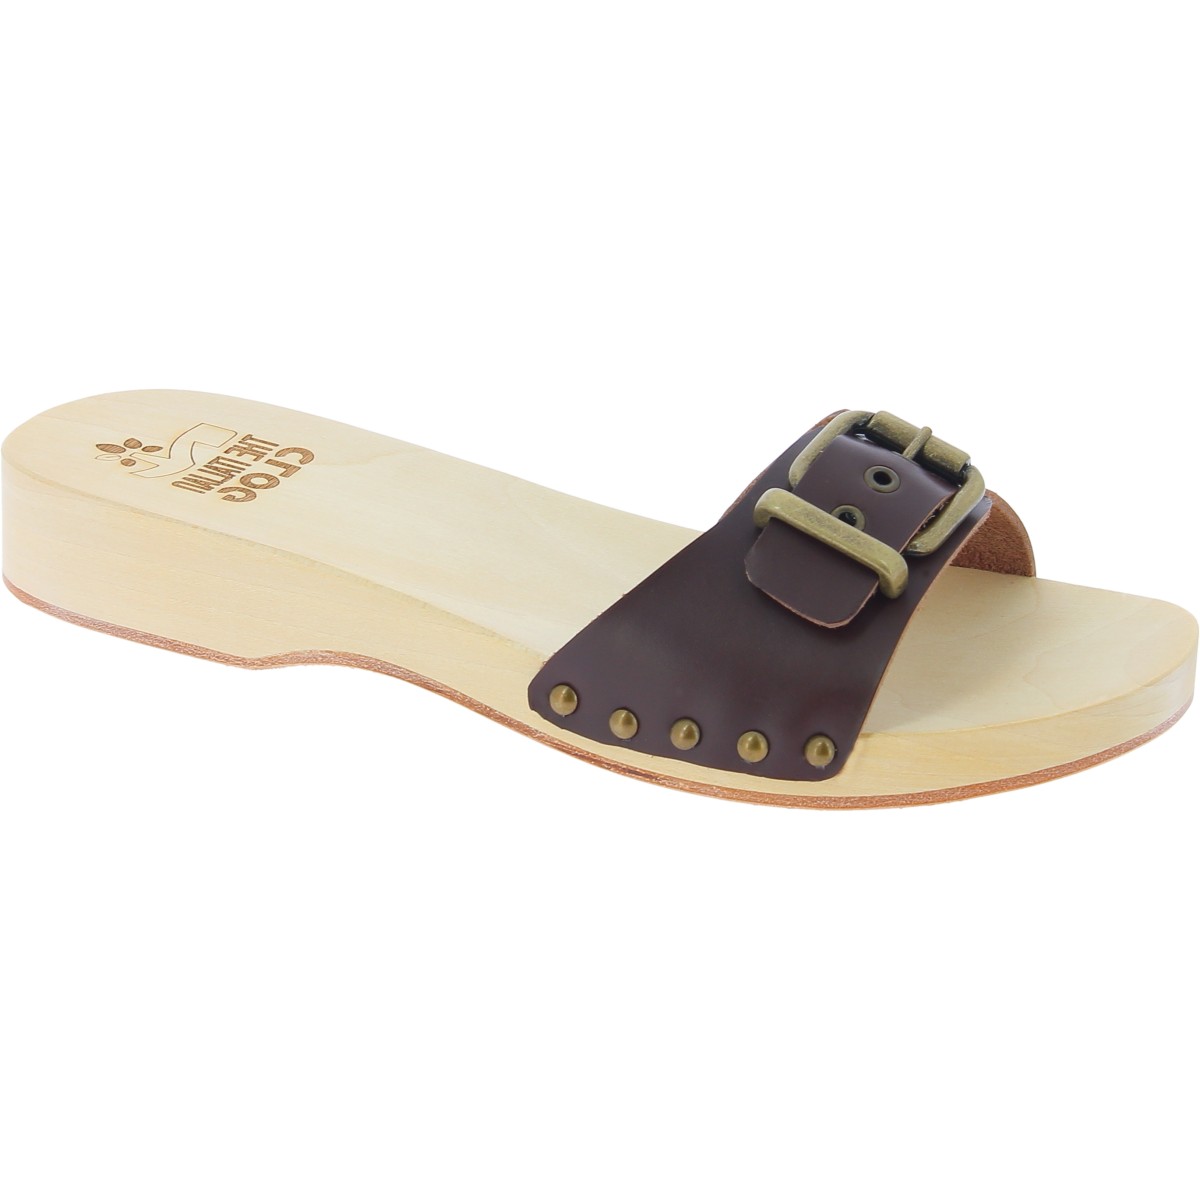 Buy Wooden Slippers - Lowest price in India| GlowRoad-thanhphatduhoc.com.vn